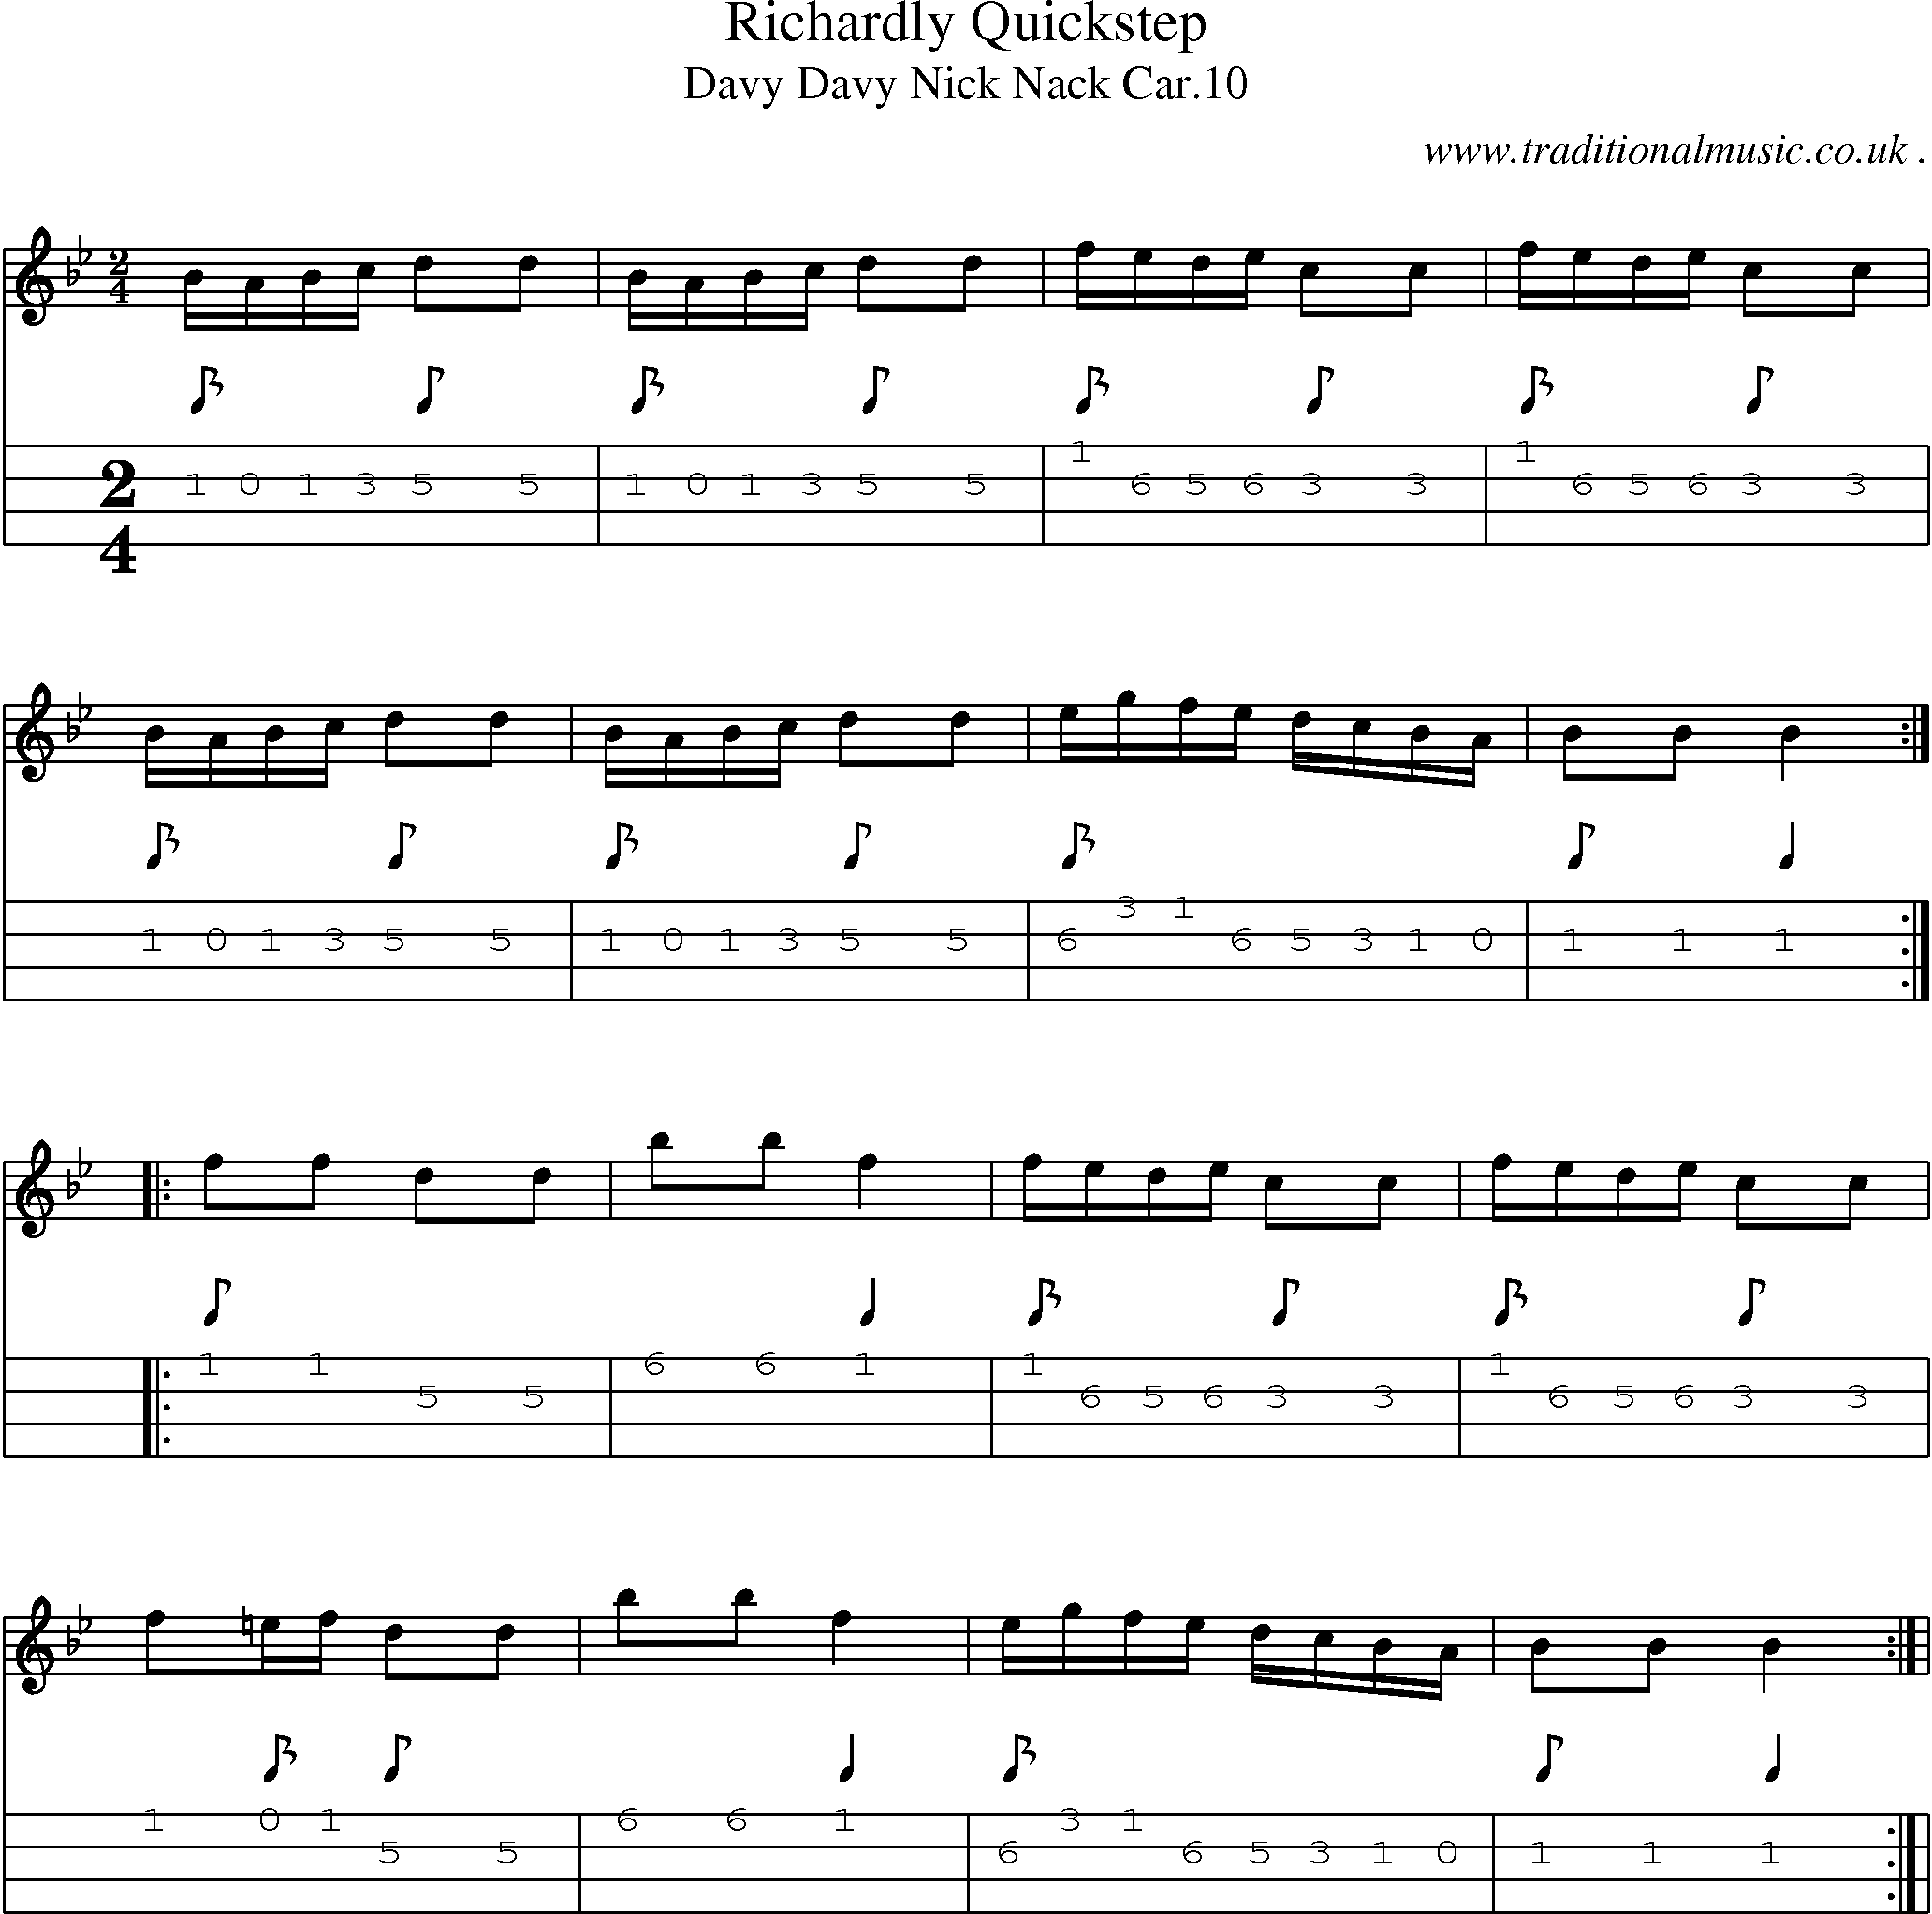 Sheet-Music and Mandolin Tabs for Richardly Quickstep